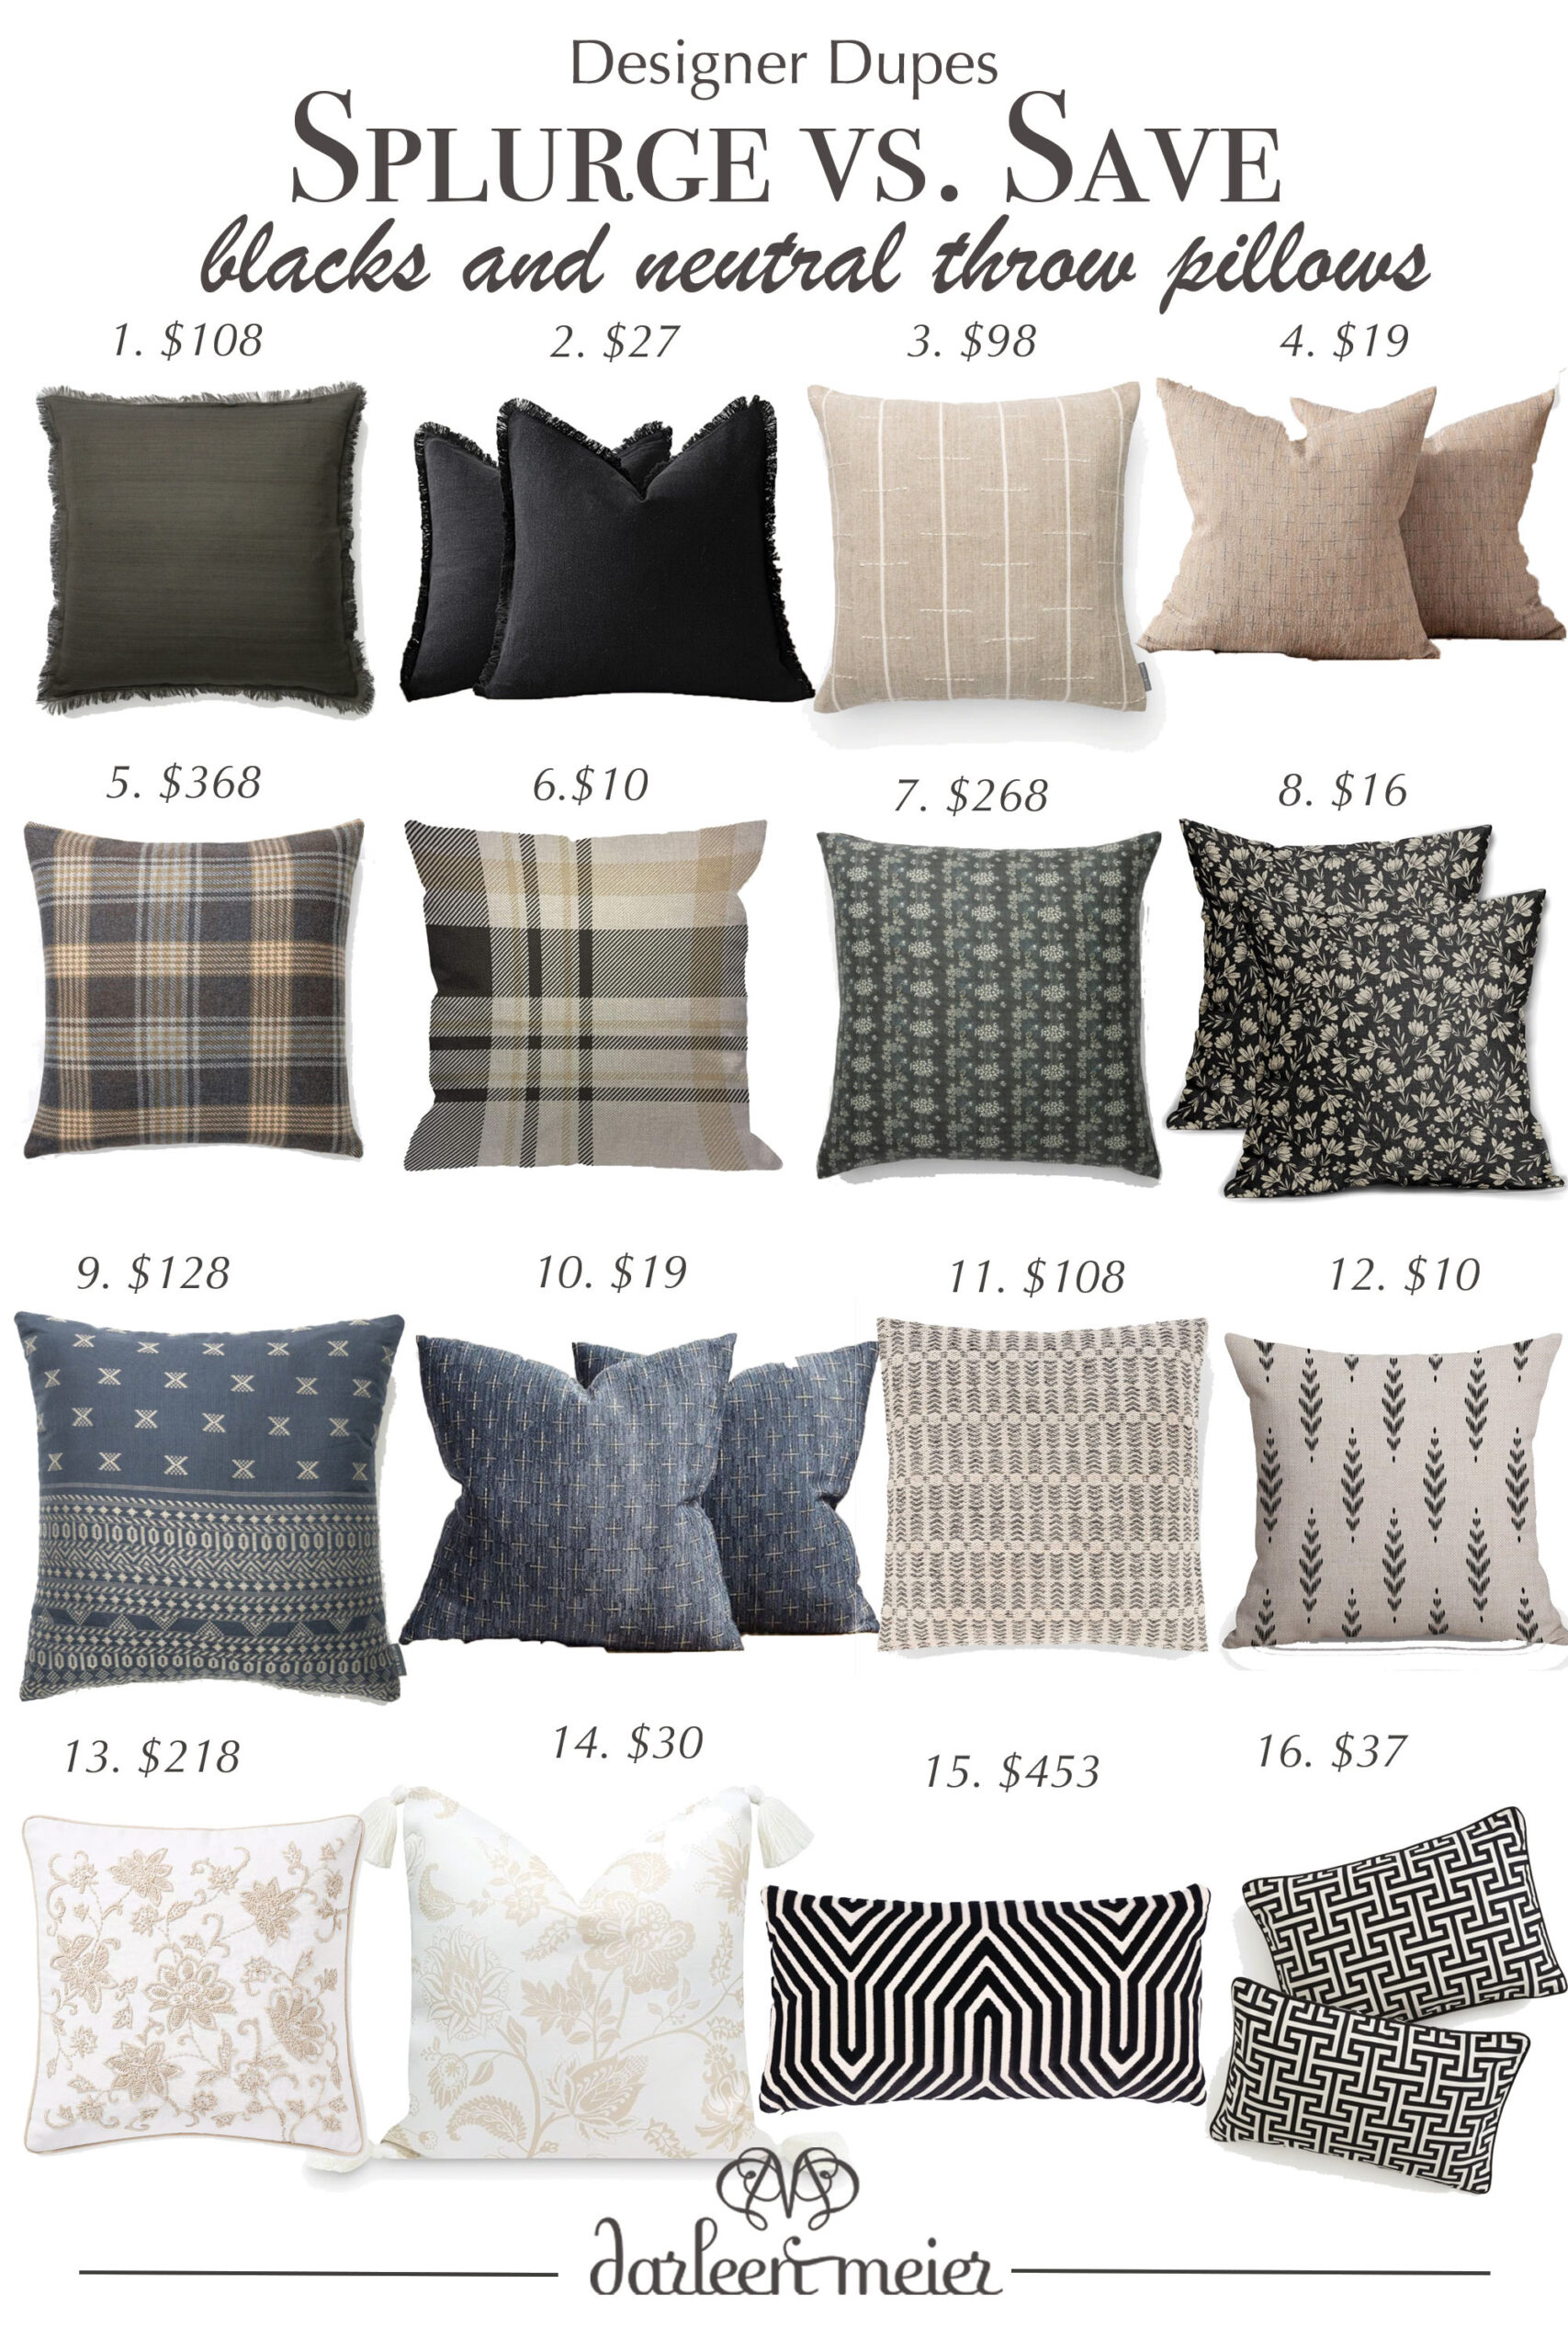 Designer Throw Pillows Or Pay Less for Knock-off Dupes.  Splurge or Save throw pillows. || Darling Darleen Top CT Lifestyle Blogger